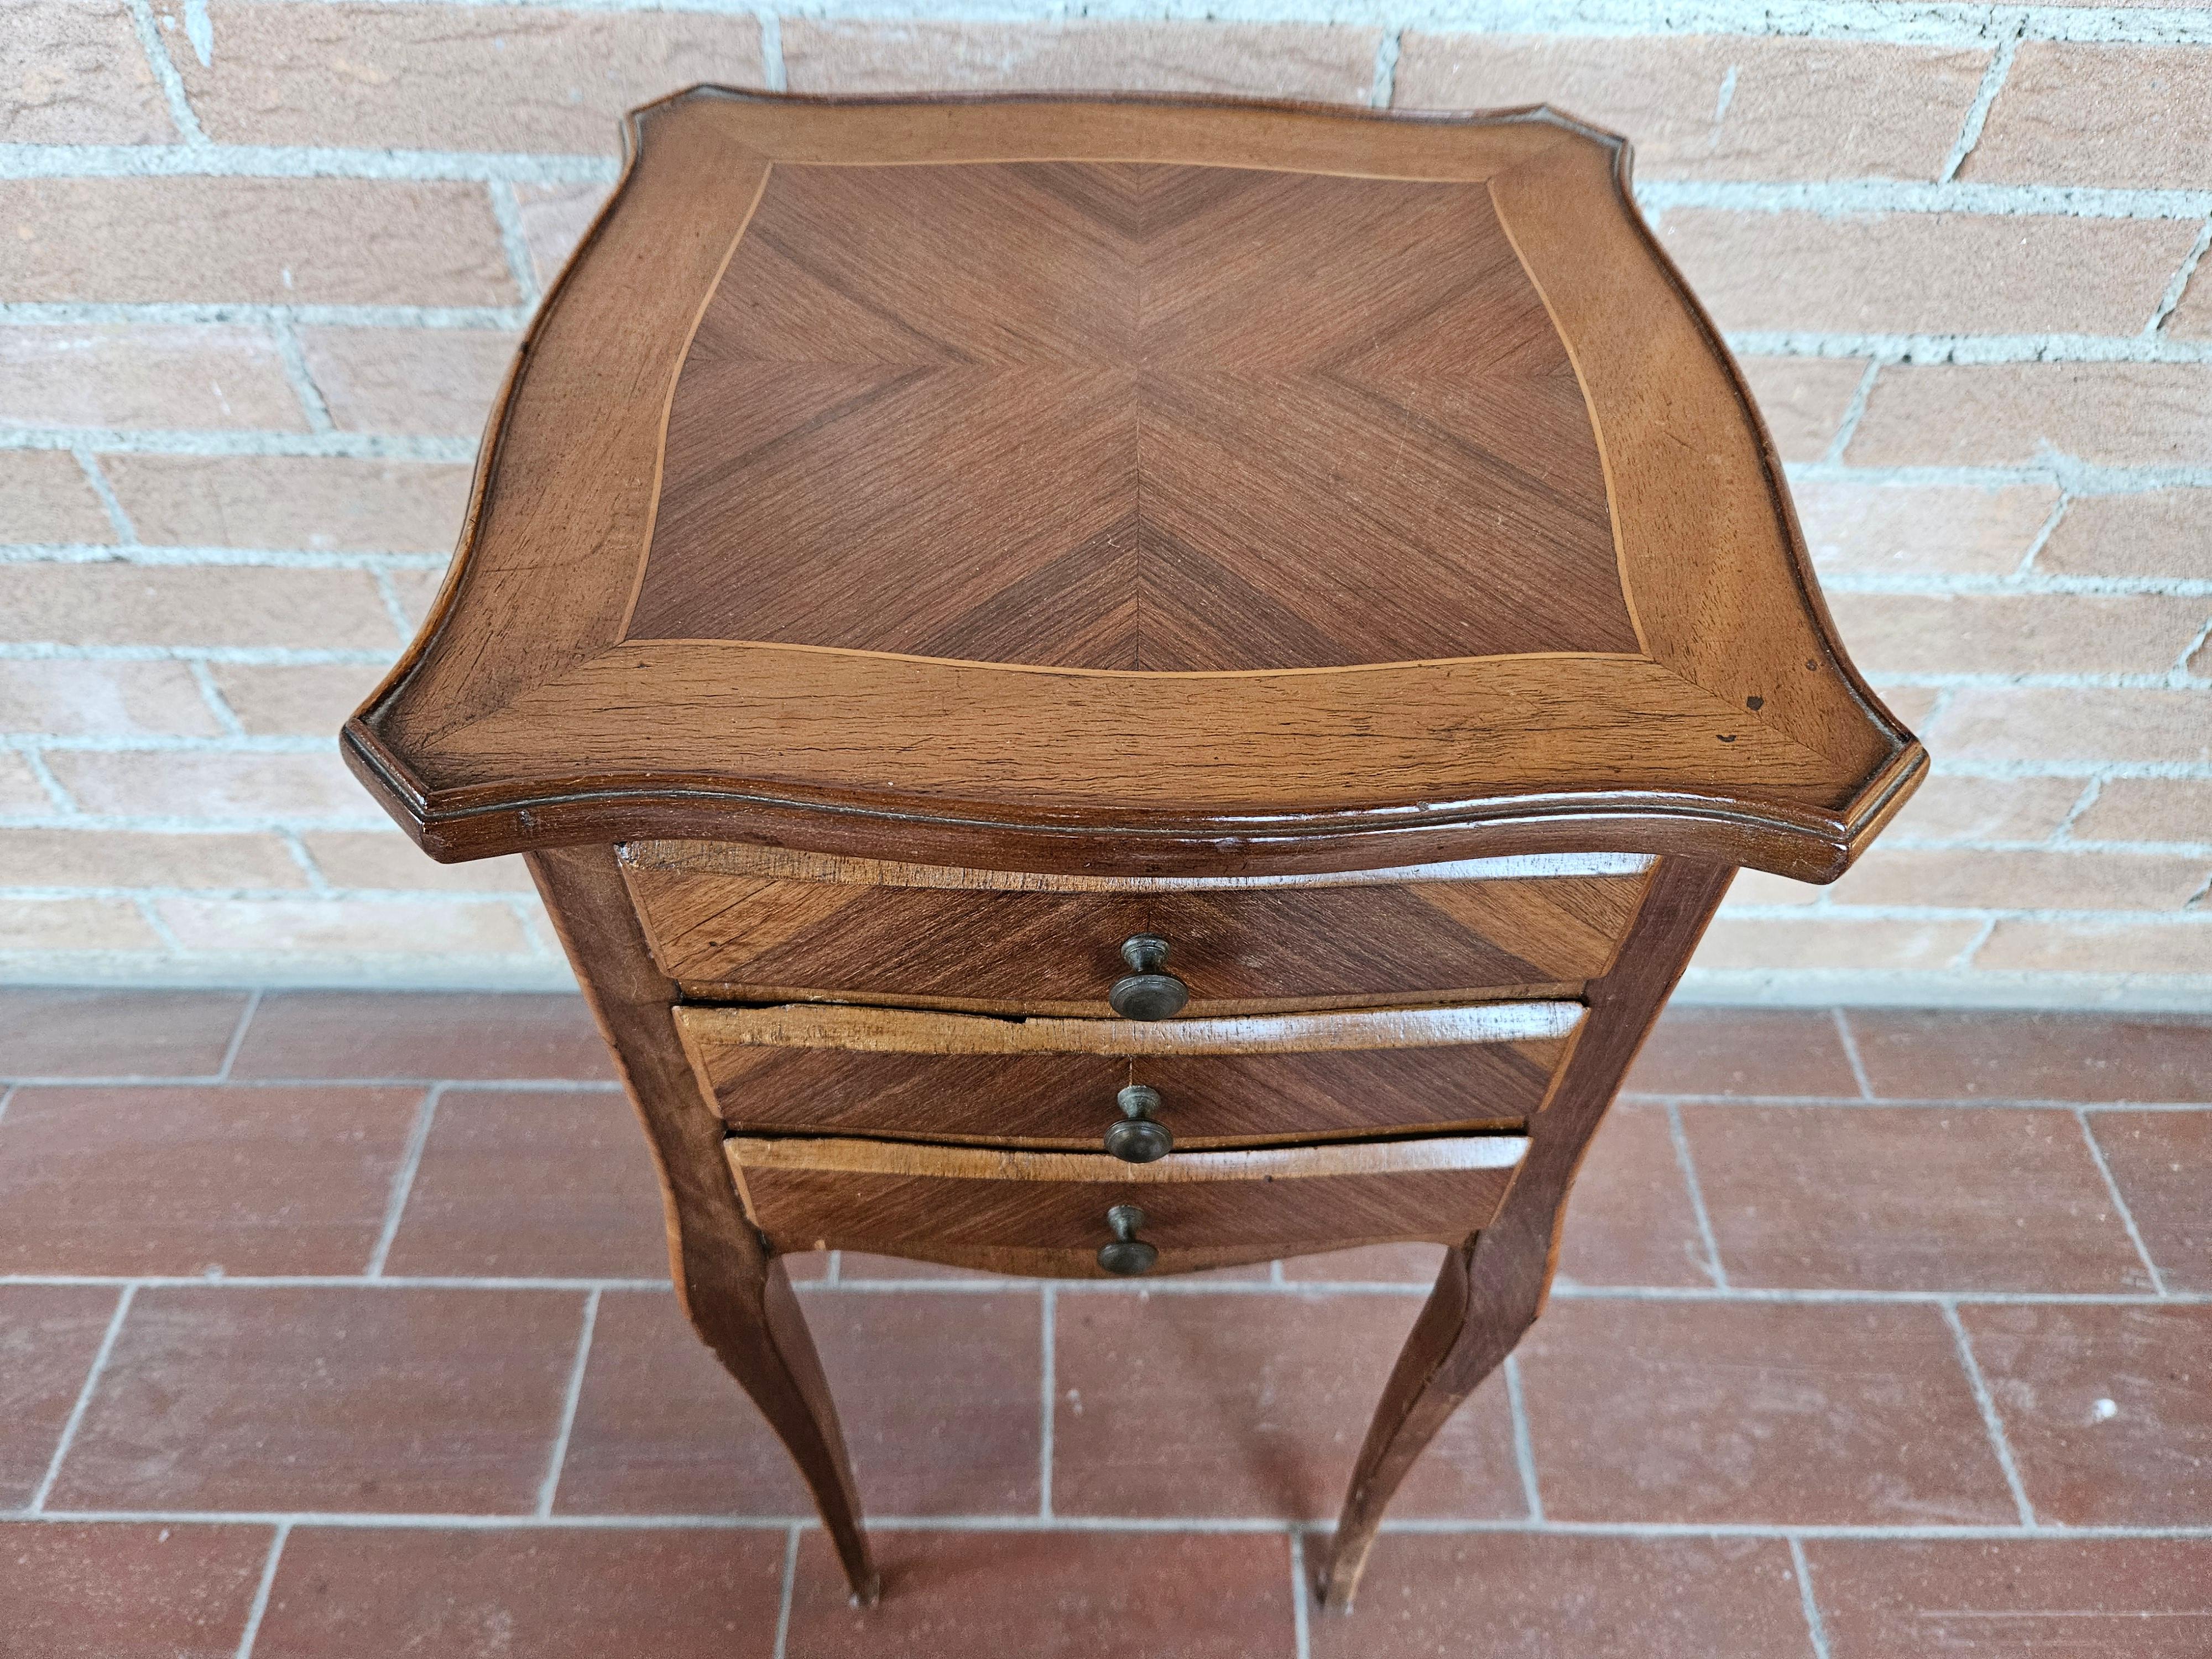 Small and elegant neoclassical-style entry table or bedside table with three small drawers.

Barbed walnut frame.

Normal signs of wear due to age and use.
